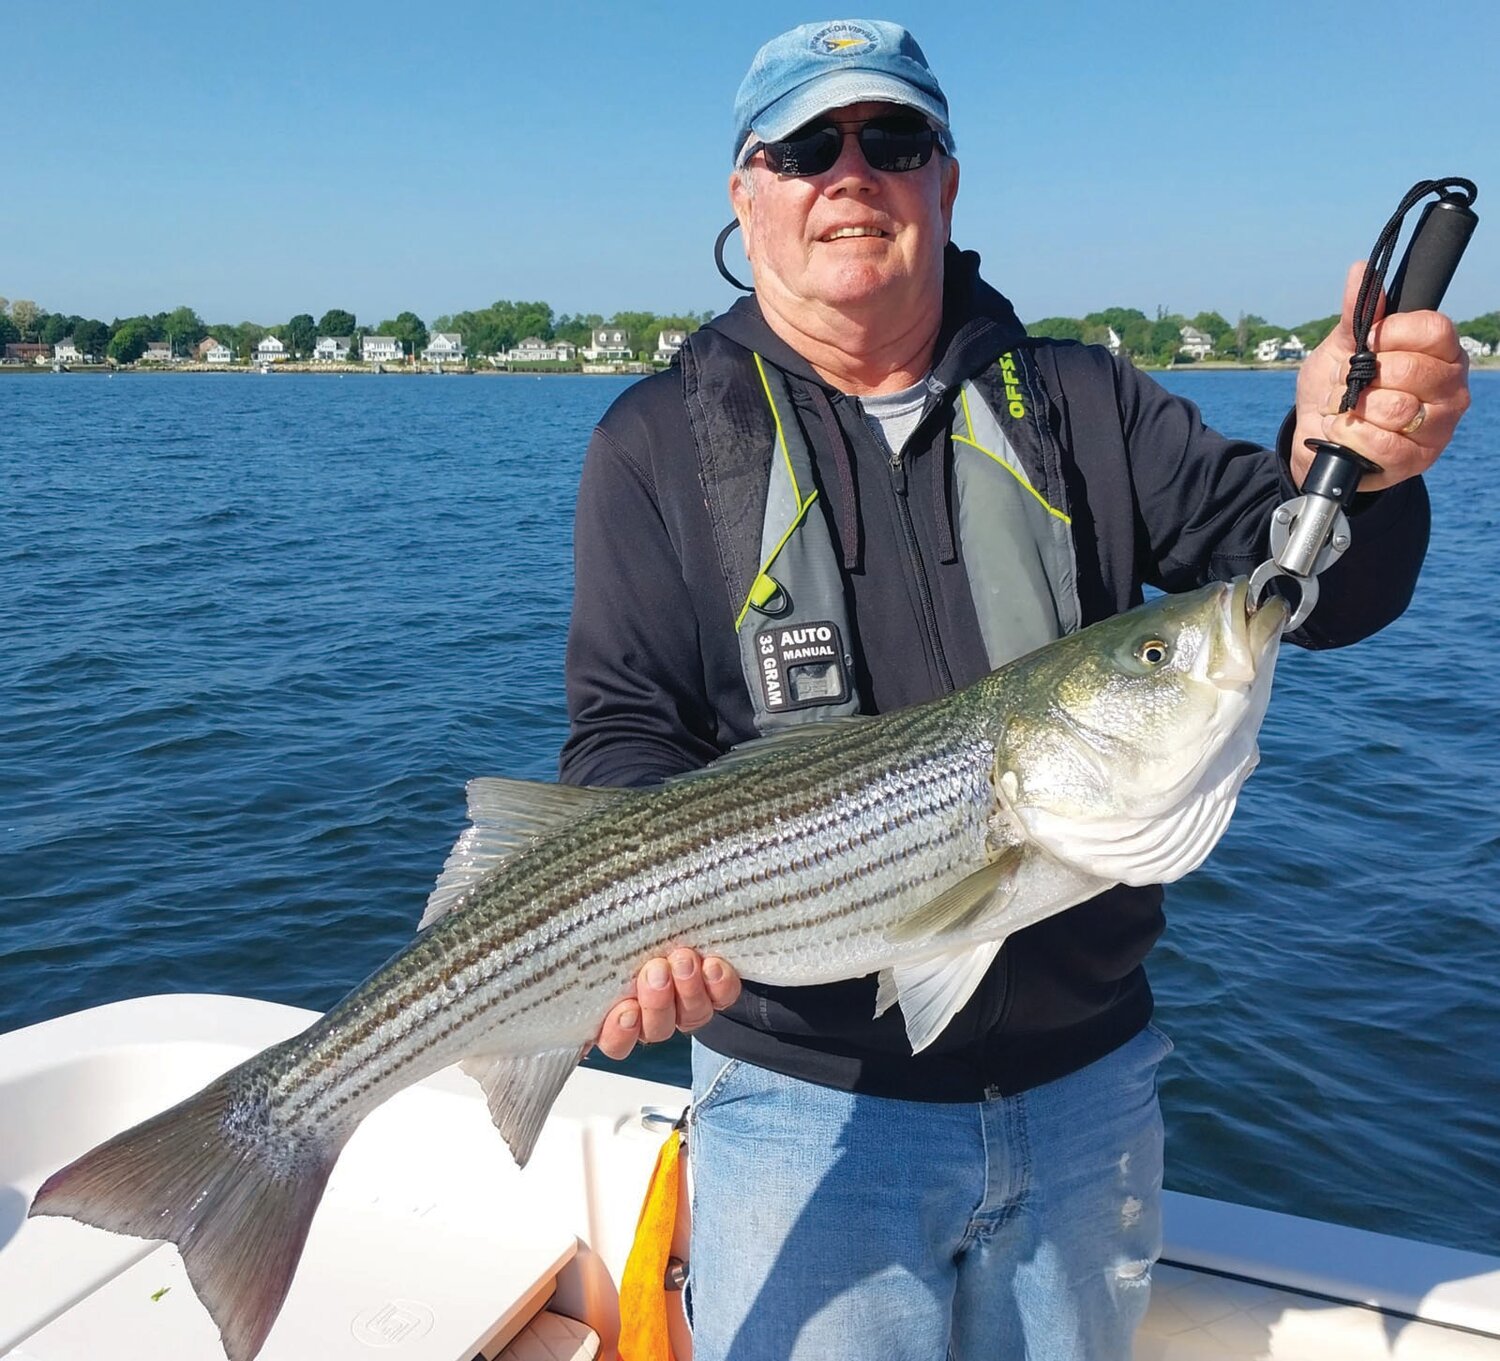 STRIPER BITE STRONG: Angler Bob Donald of North Kingstown caught bass to 33 inches trolling tube & worm north of Conimicut Light. An influx of pogies enhanced the striper bite last week.